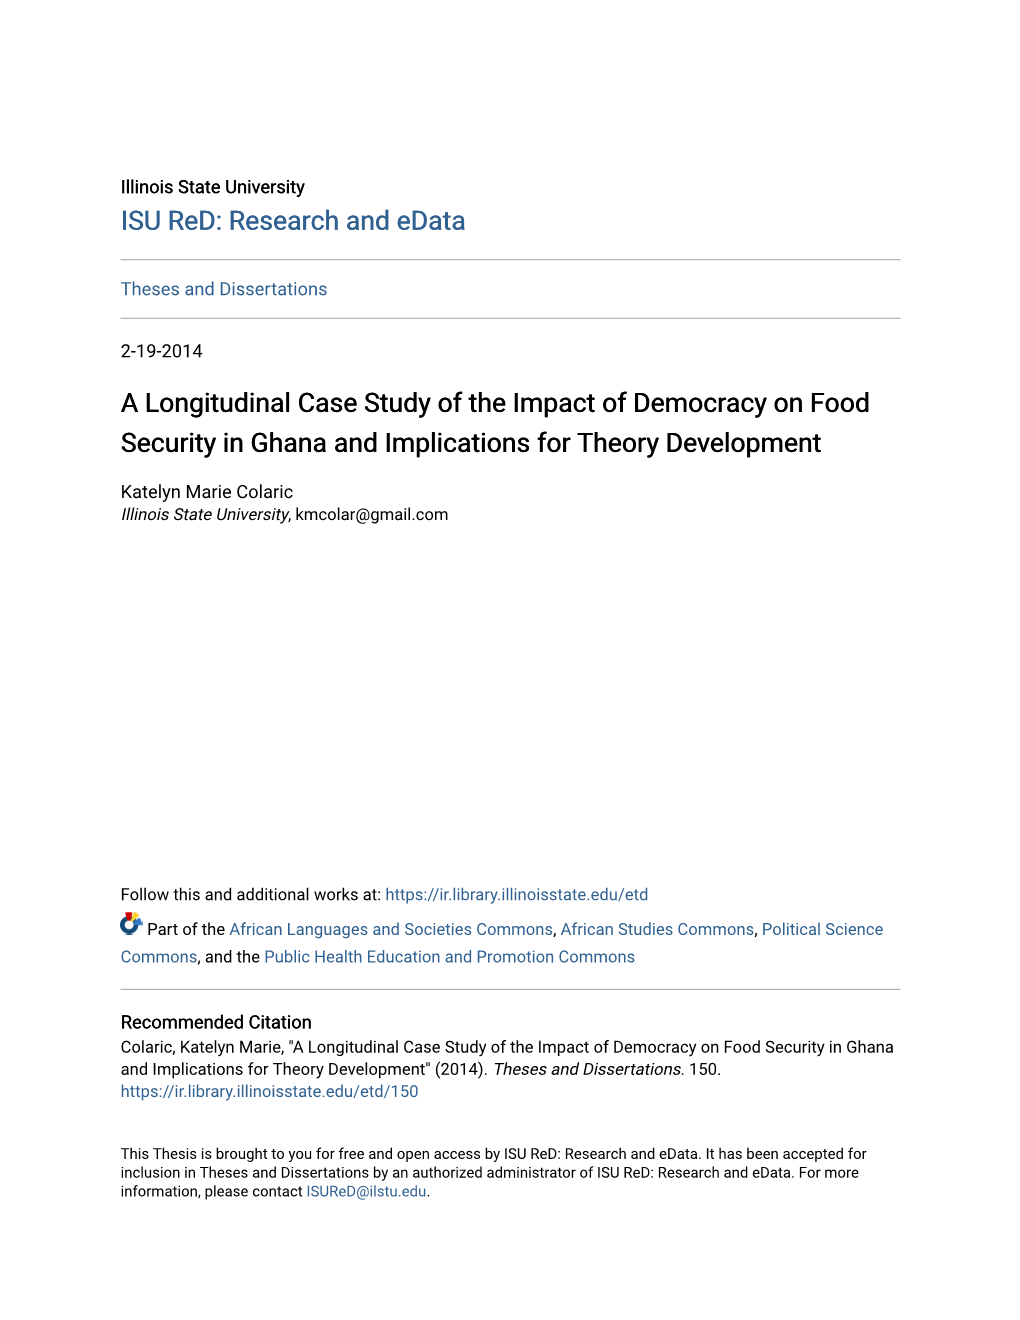 A Longitudinal Case Study of the Impact of Democracy on Food Security in Ghana and Implications for Theory Development